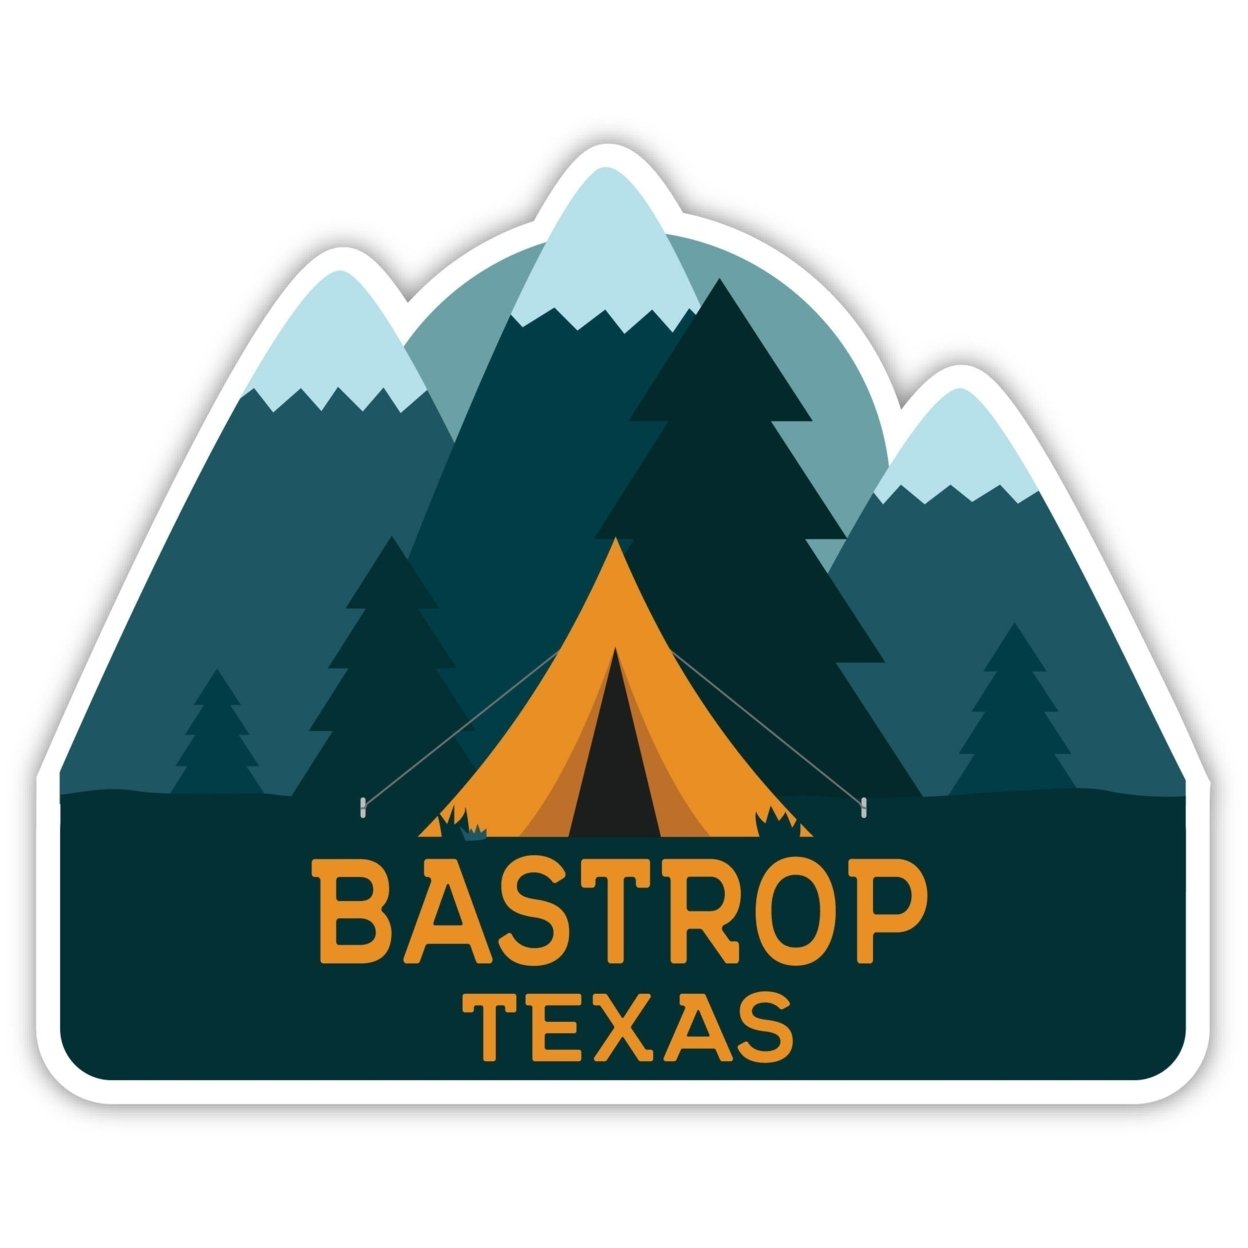 Bastrop Texas Souvenir Decorative Stickers (Choose Theme And Size) - 4-Pack, 12-Inch, Adventures Awaits